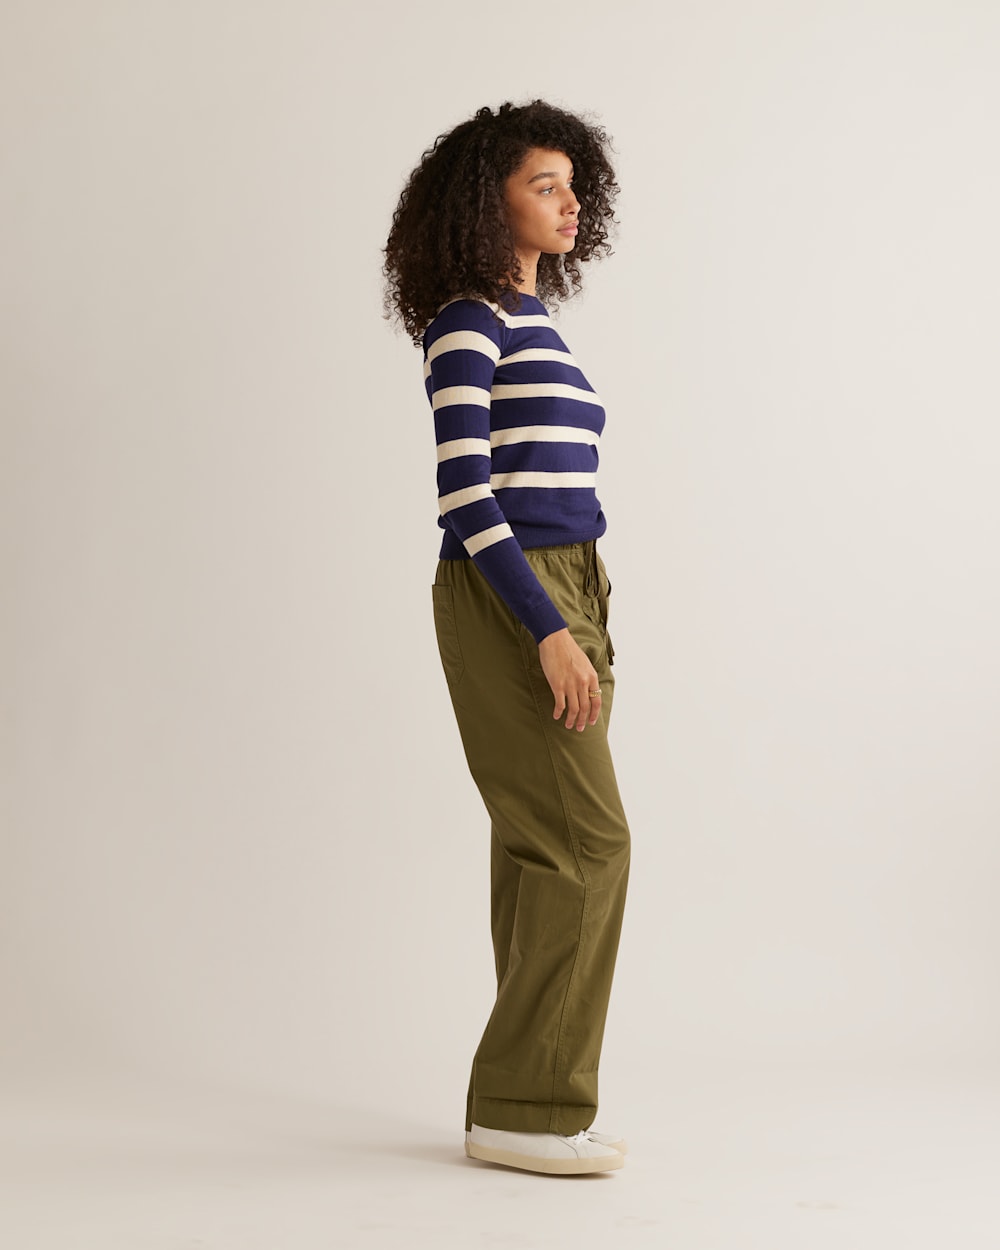 ALTERNATE VIEW OF WOMEN'S COTTON/CASHMERE STRIPED PULLOVER IN NAVY/CREAM image number 2